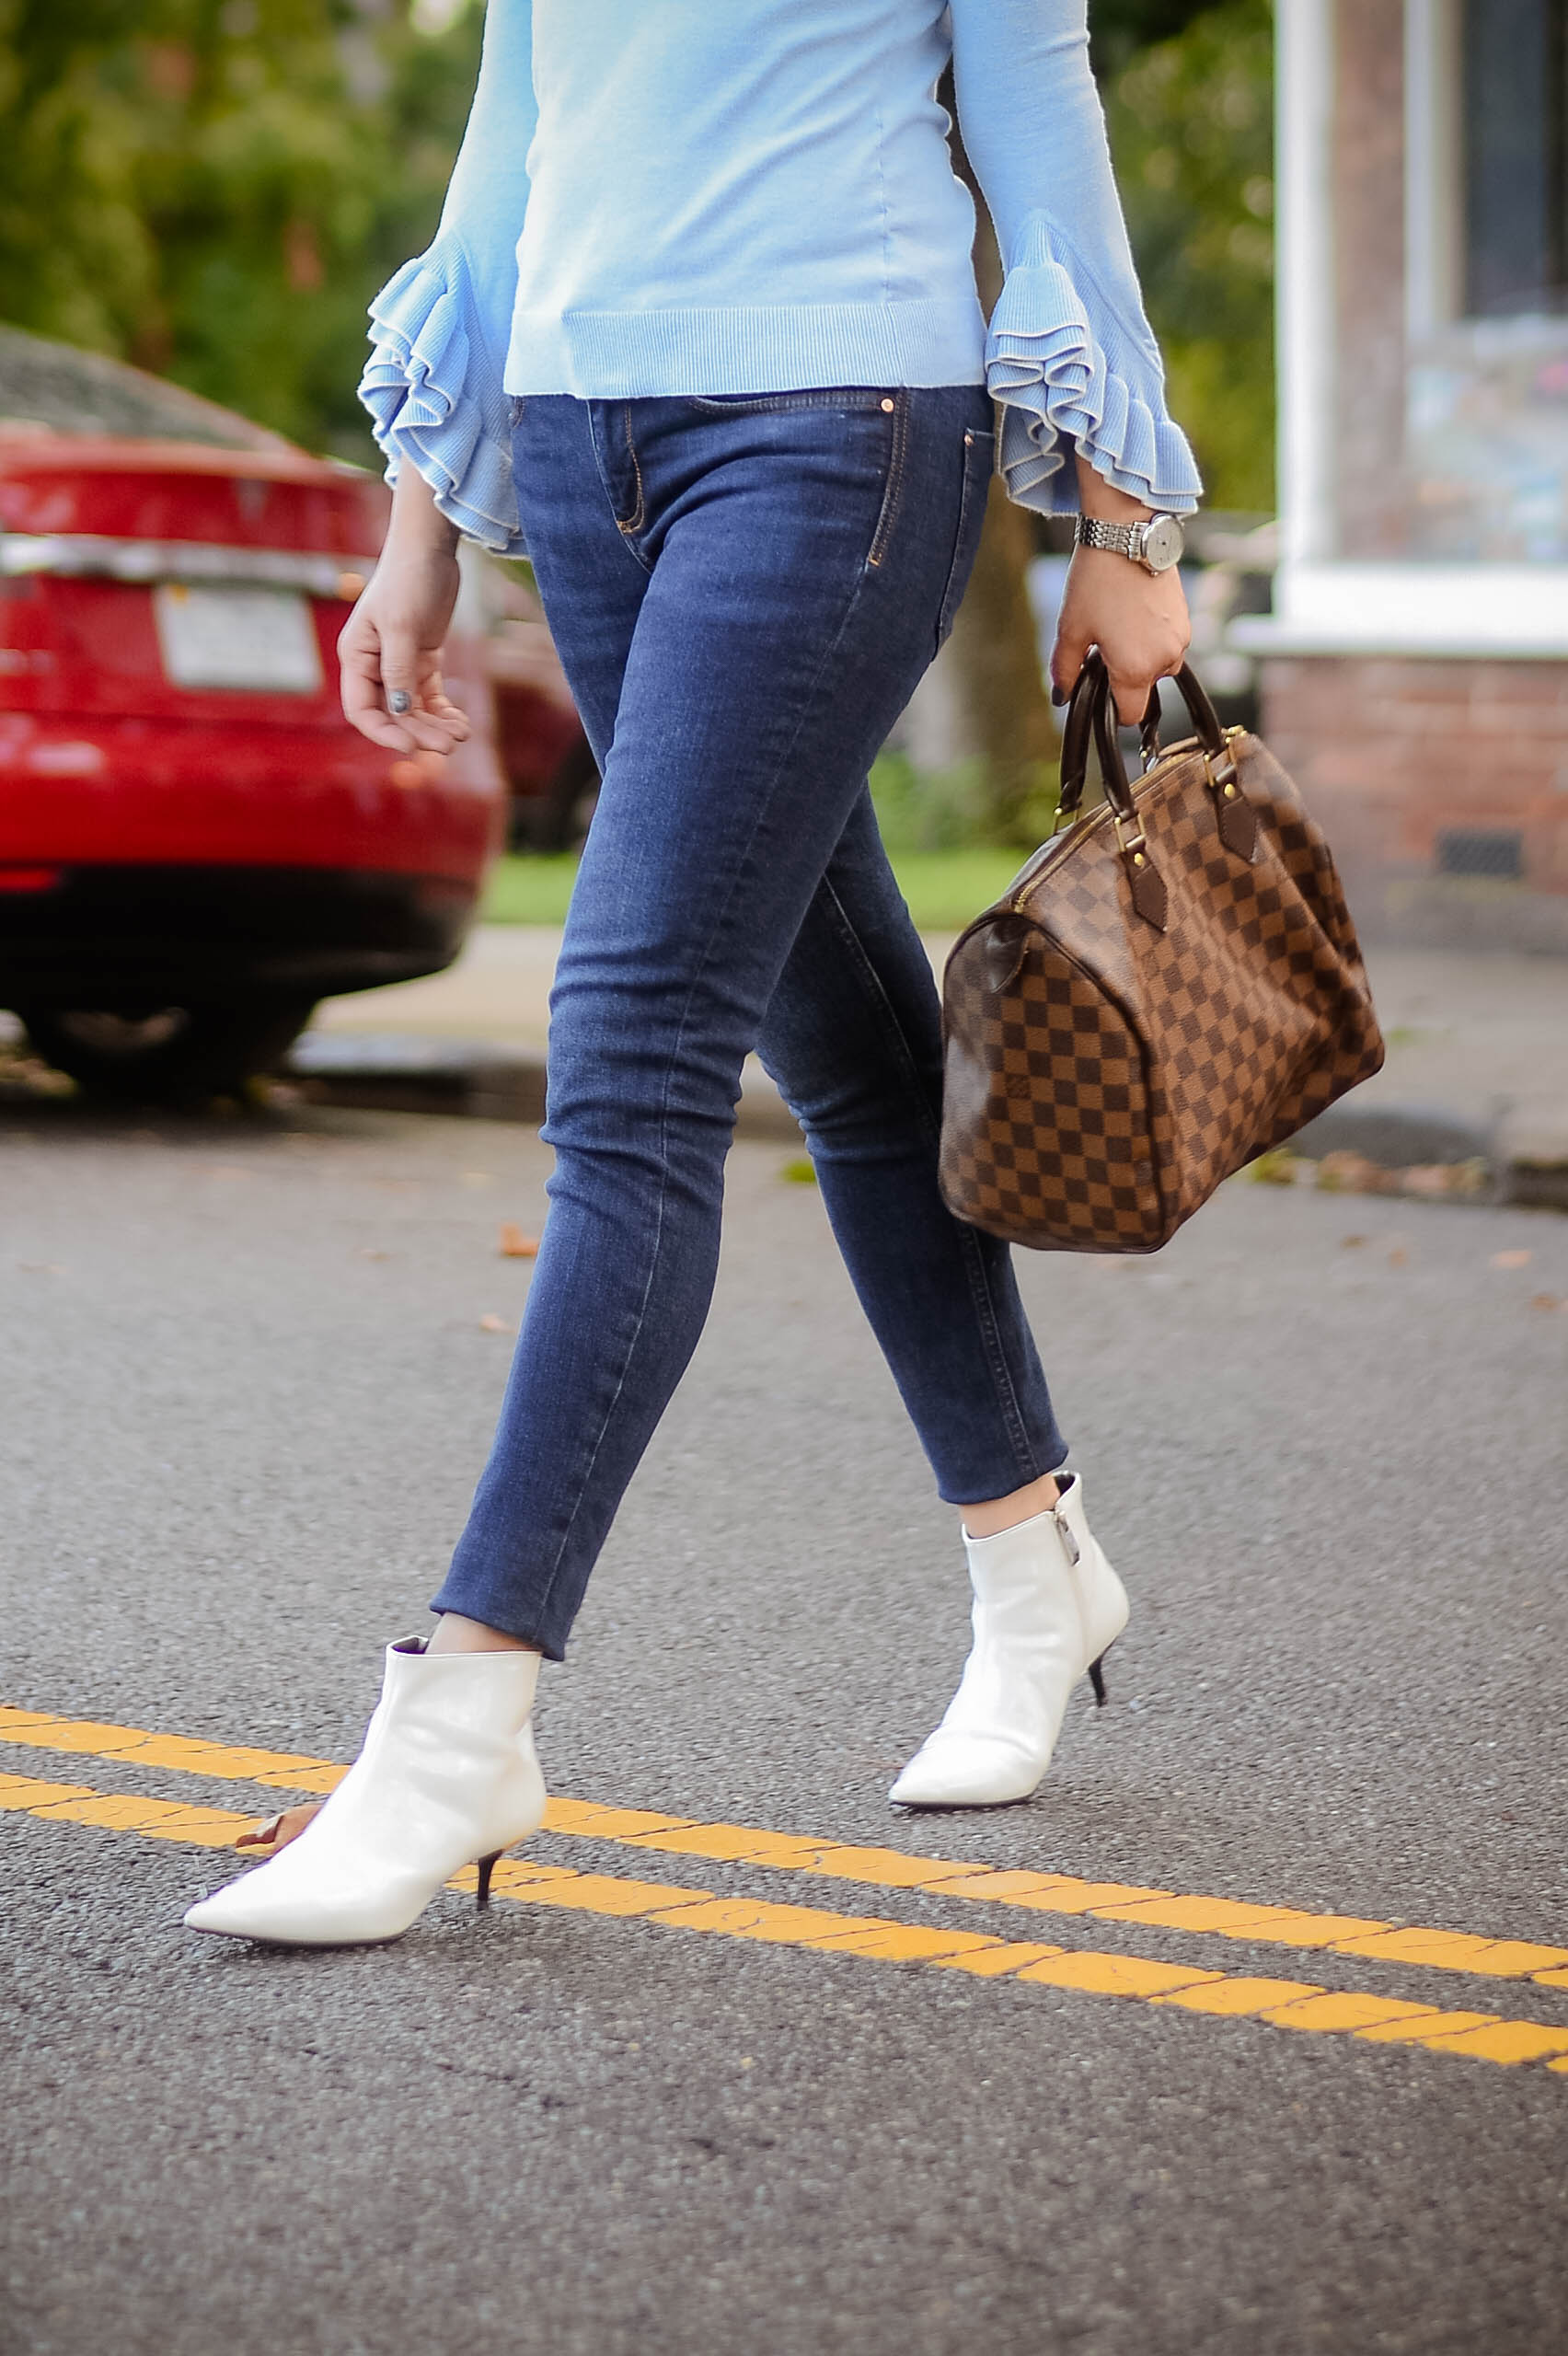 Rainy Day Style Diary: Sweater and White Booties